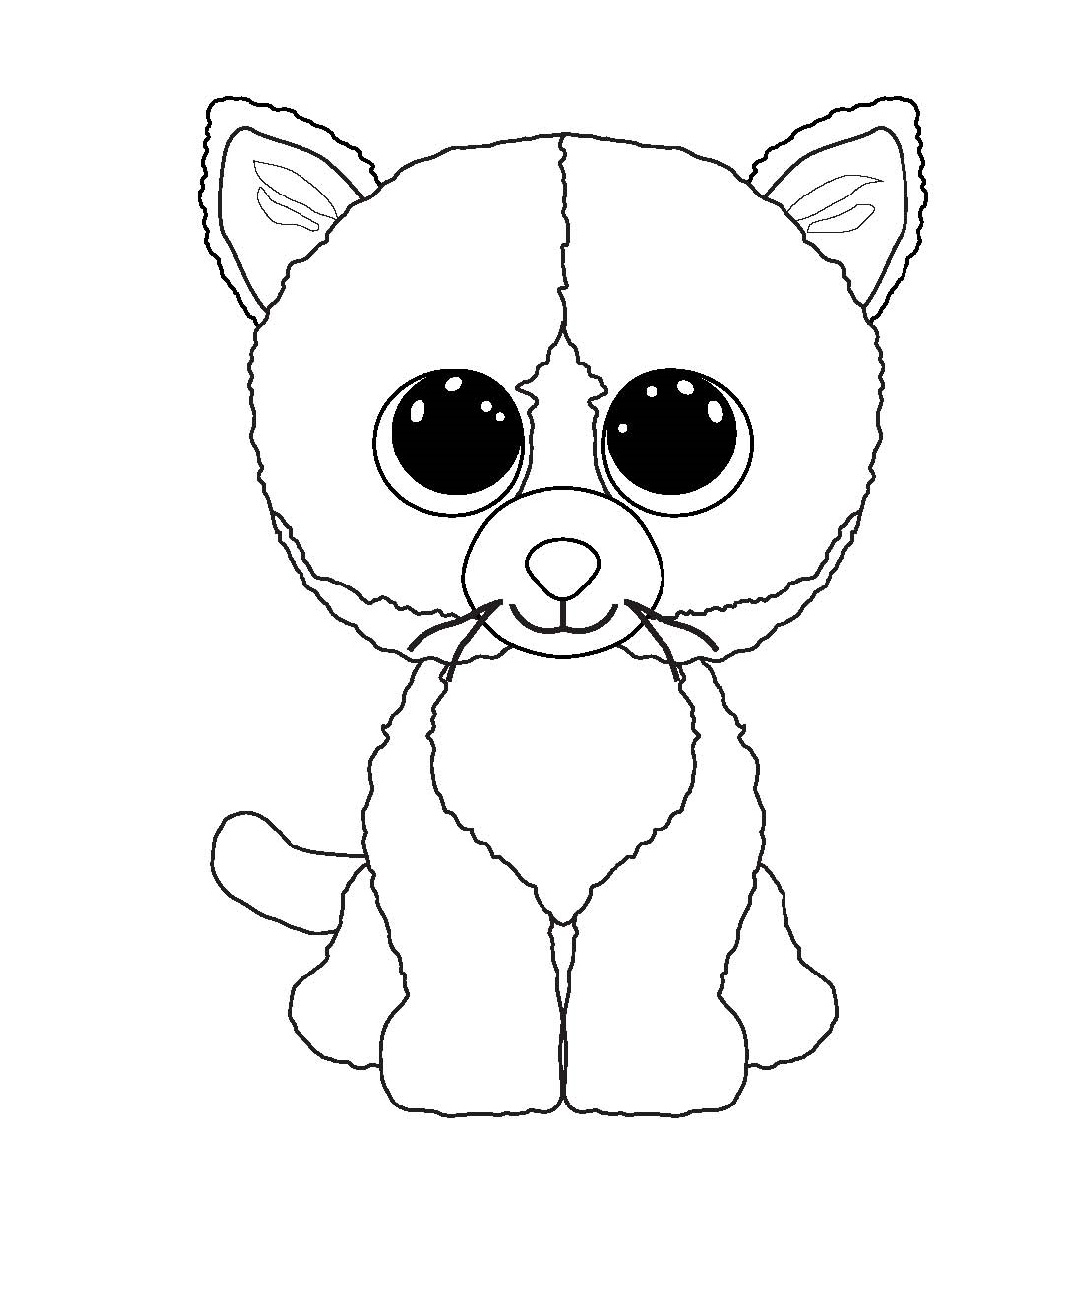 Beanie Boo Coloring Pages Only For Kids Free Printable ...